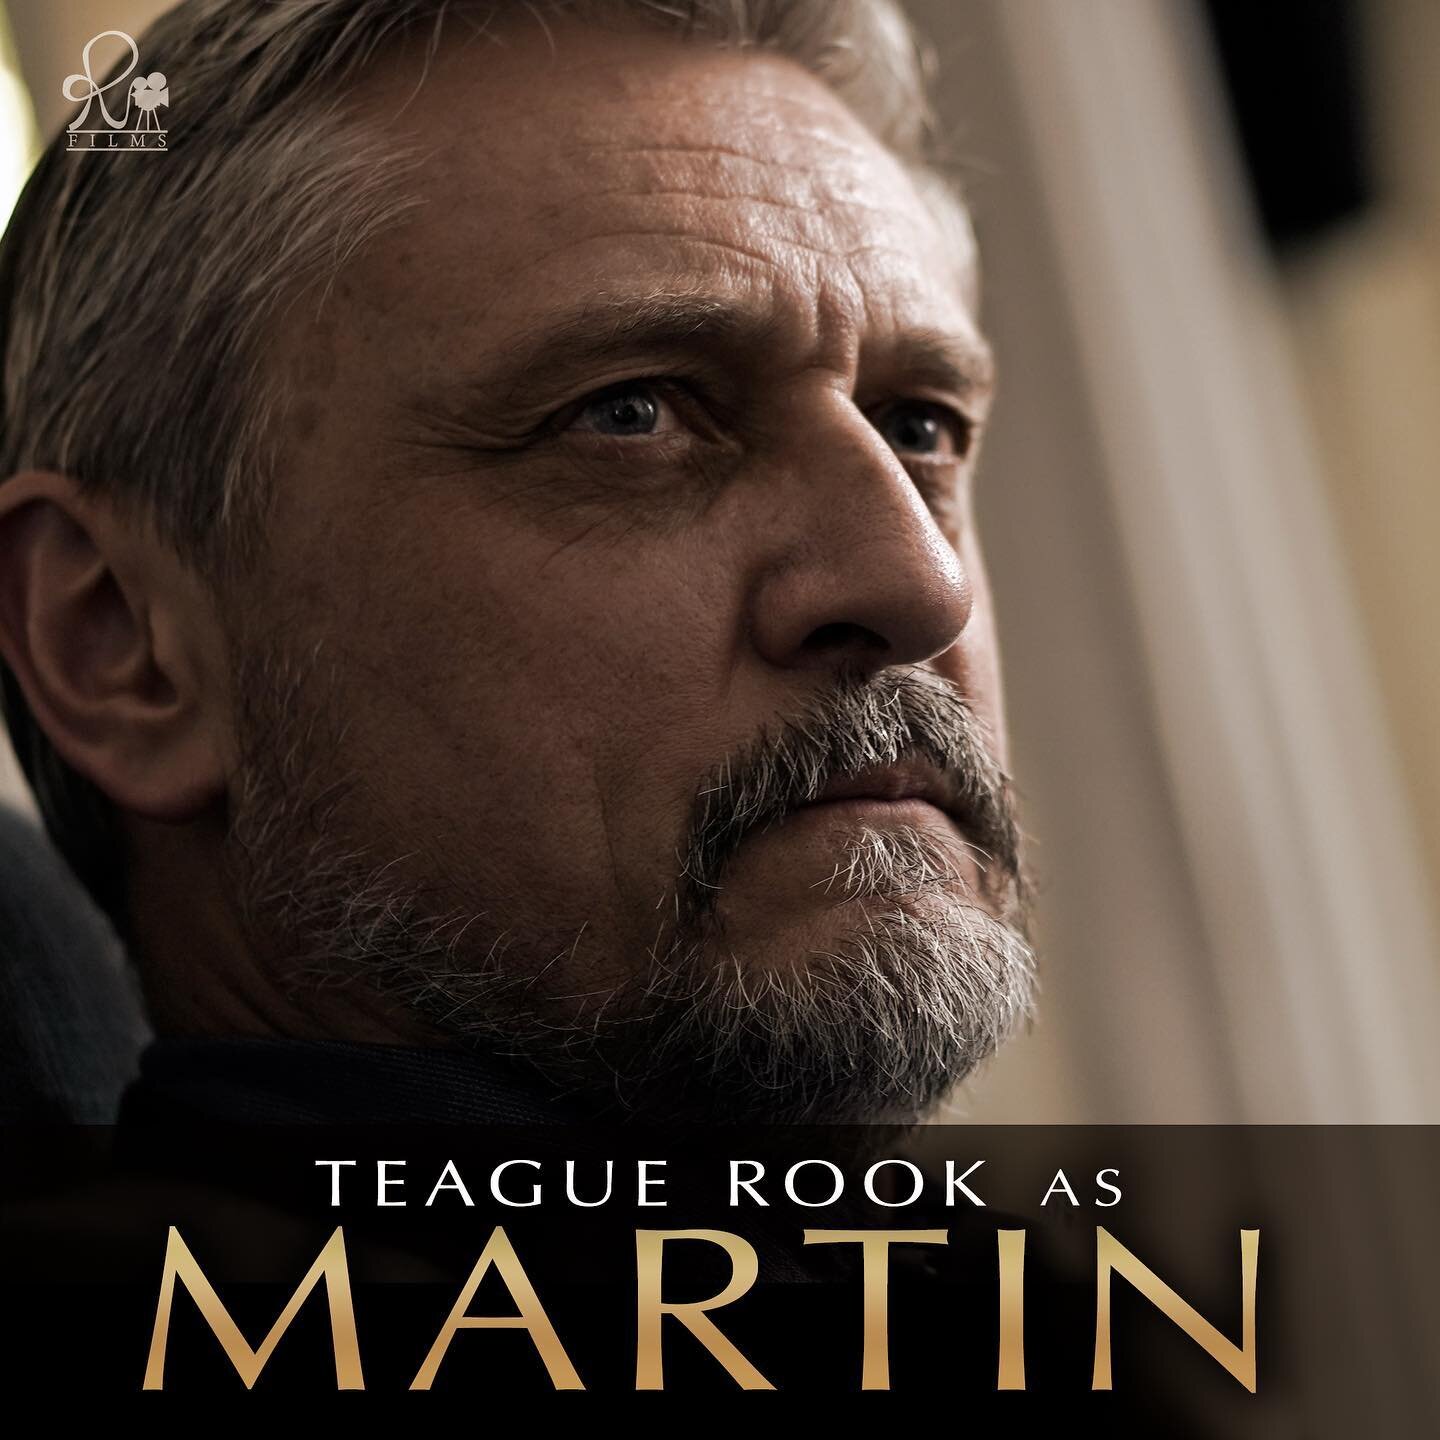 Welcome to fortified therapy, Martin Nash will see you now&hellip;
Played by Teague Rook

Credit to Ender Photography 

#moros #featurefilm #cast #castreveal #bts